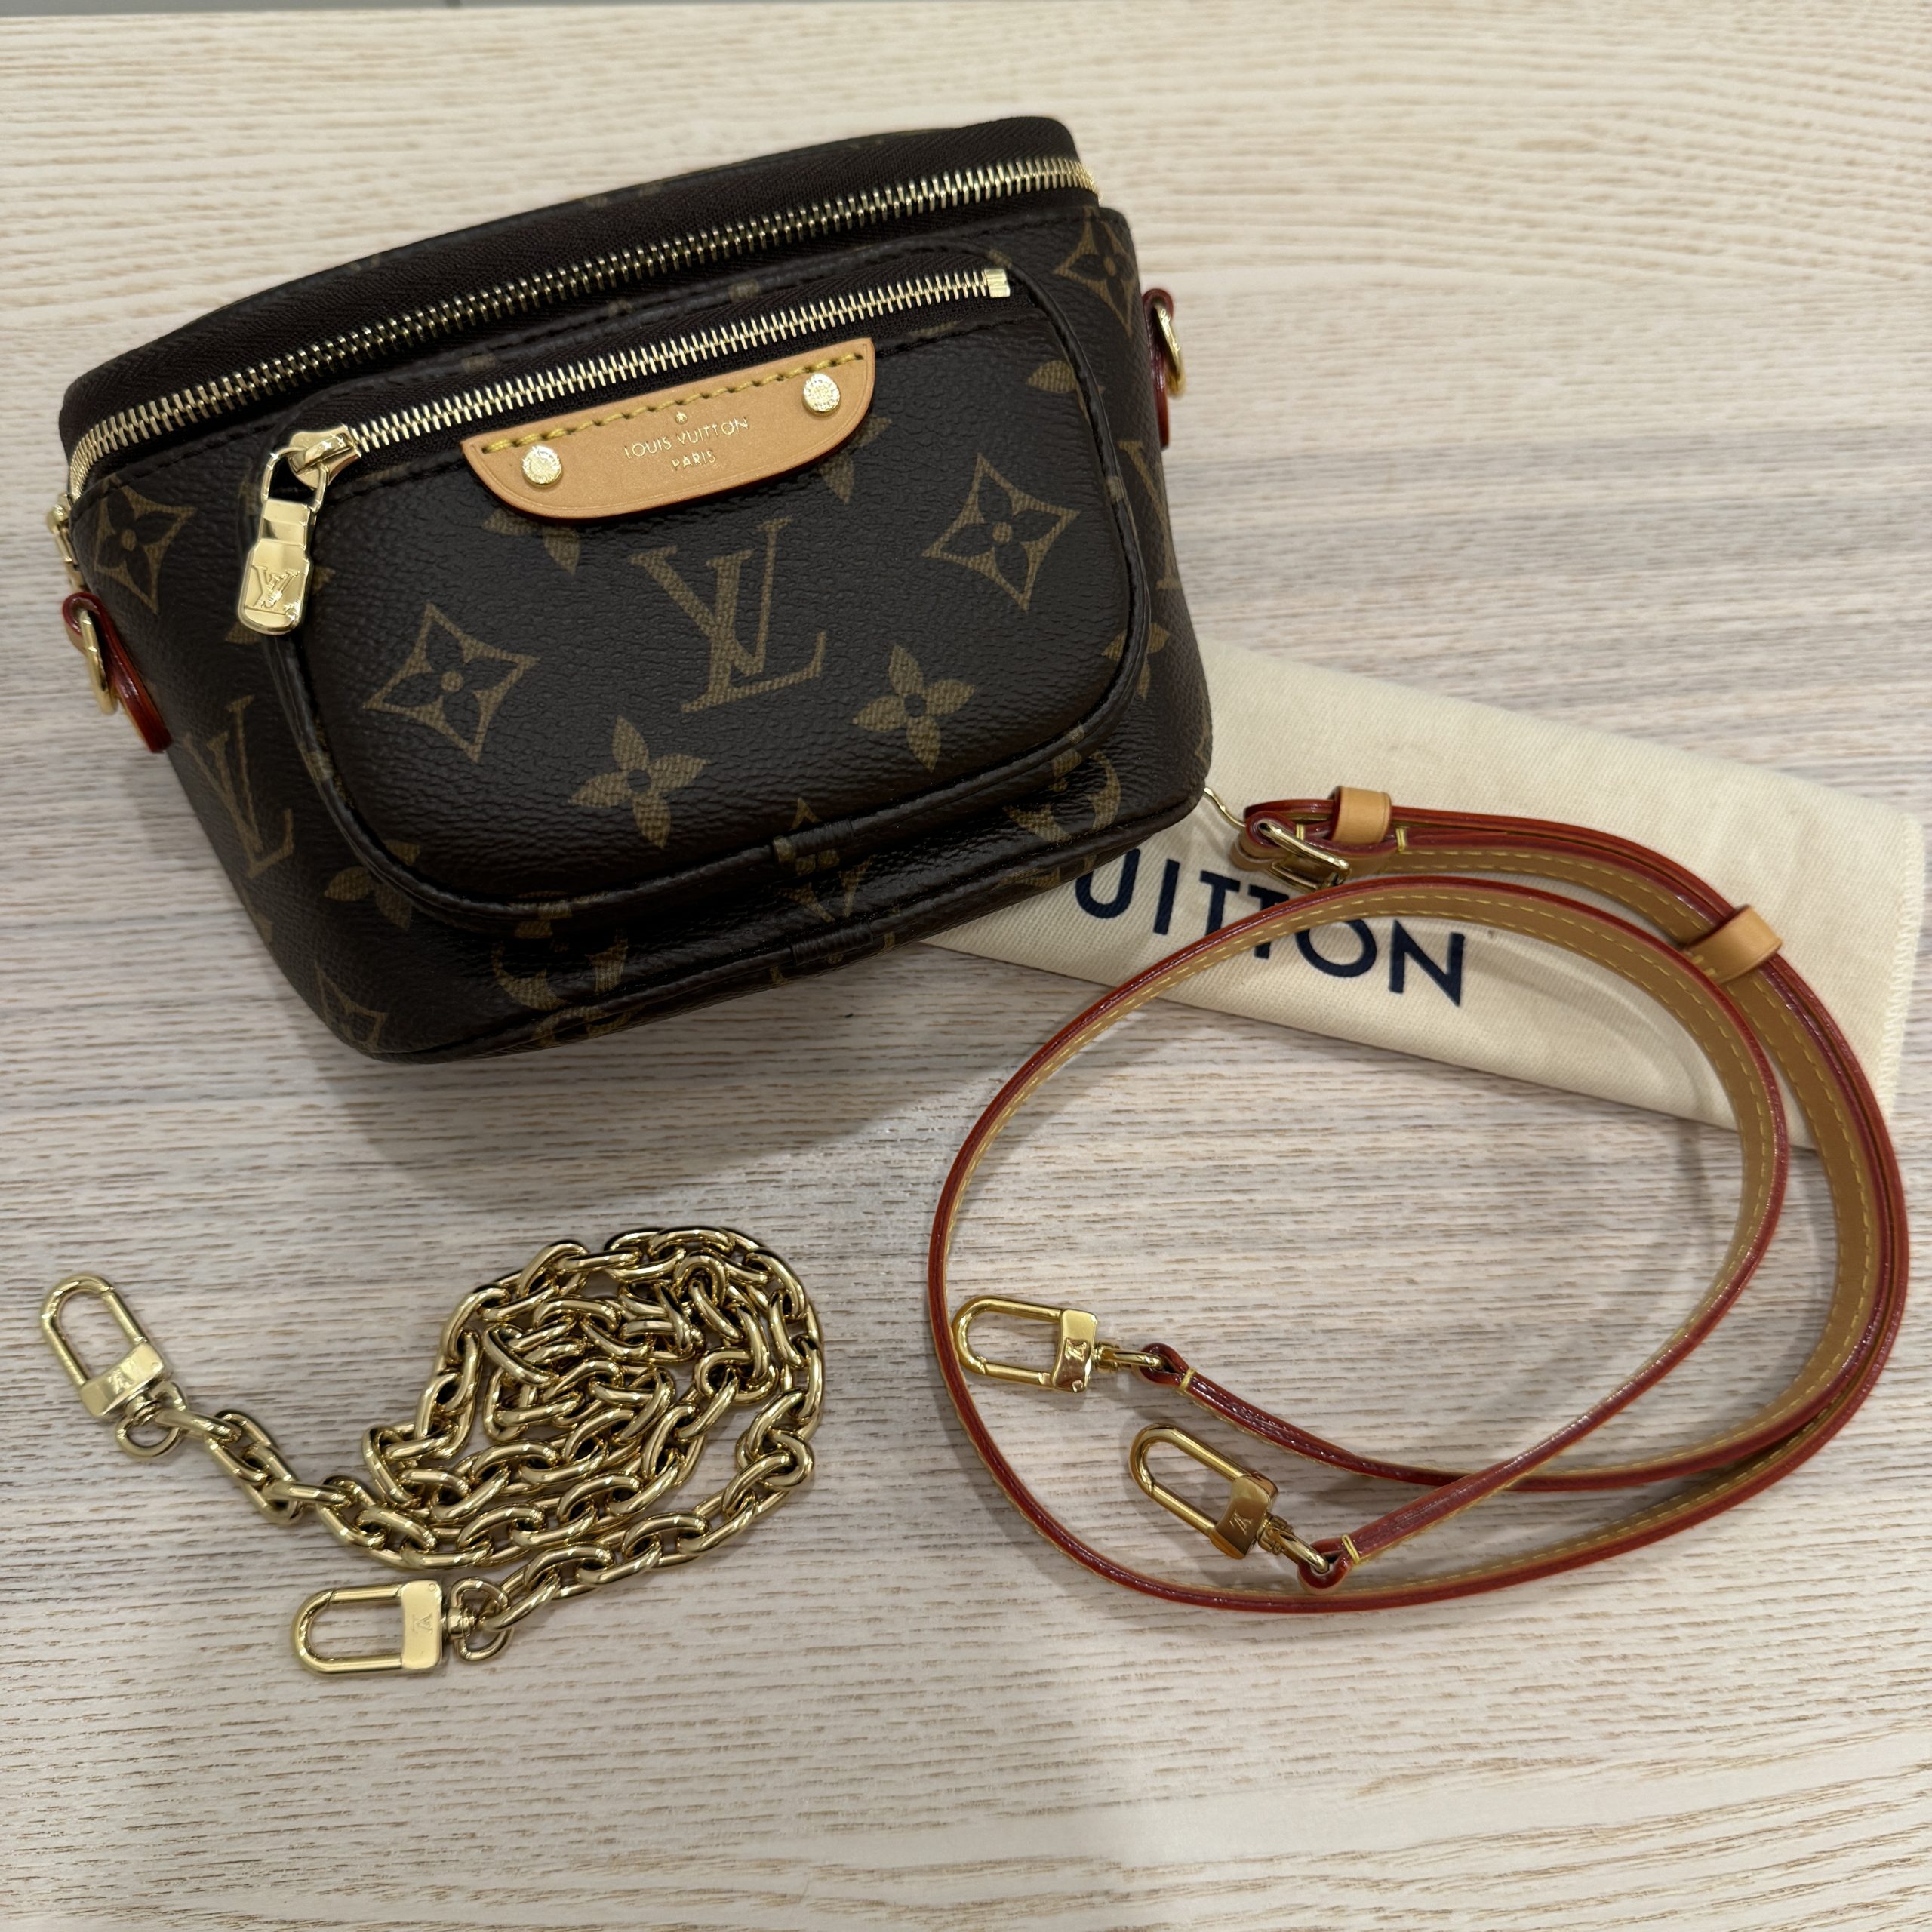 Louis Vuitton - New Wave PM - Pre-Loved